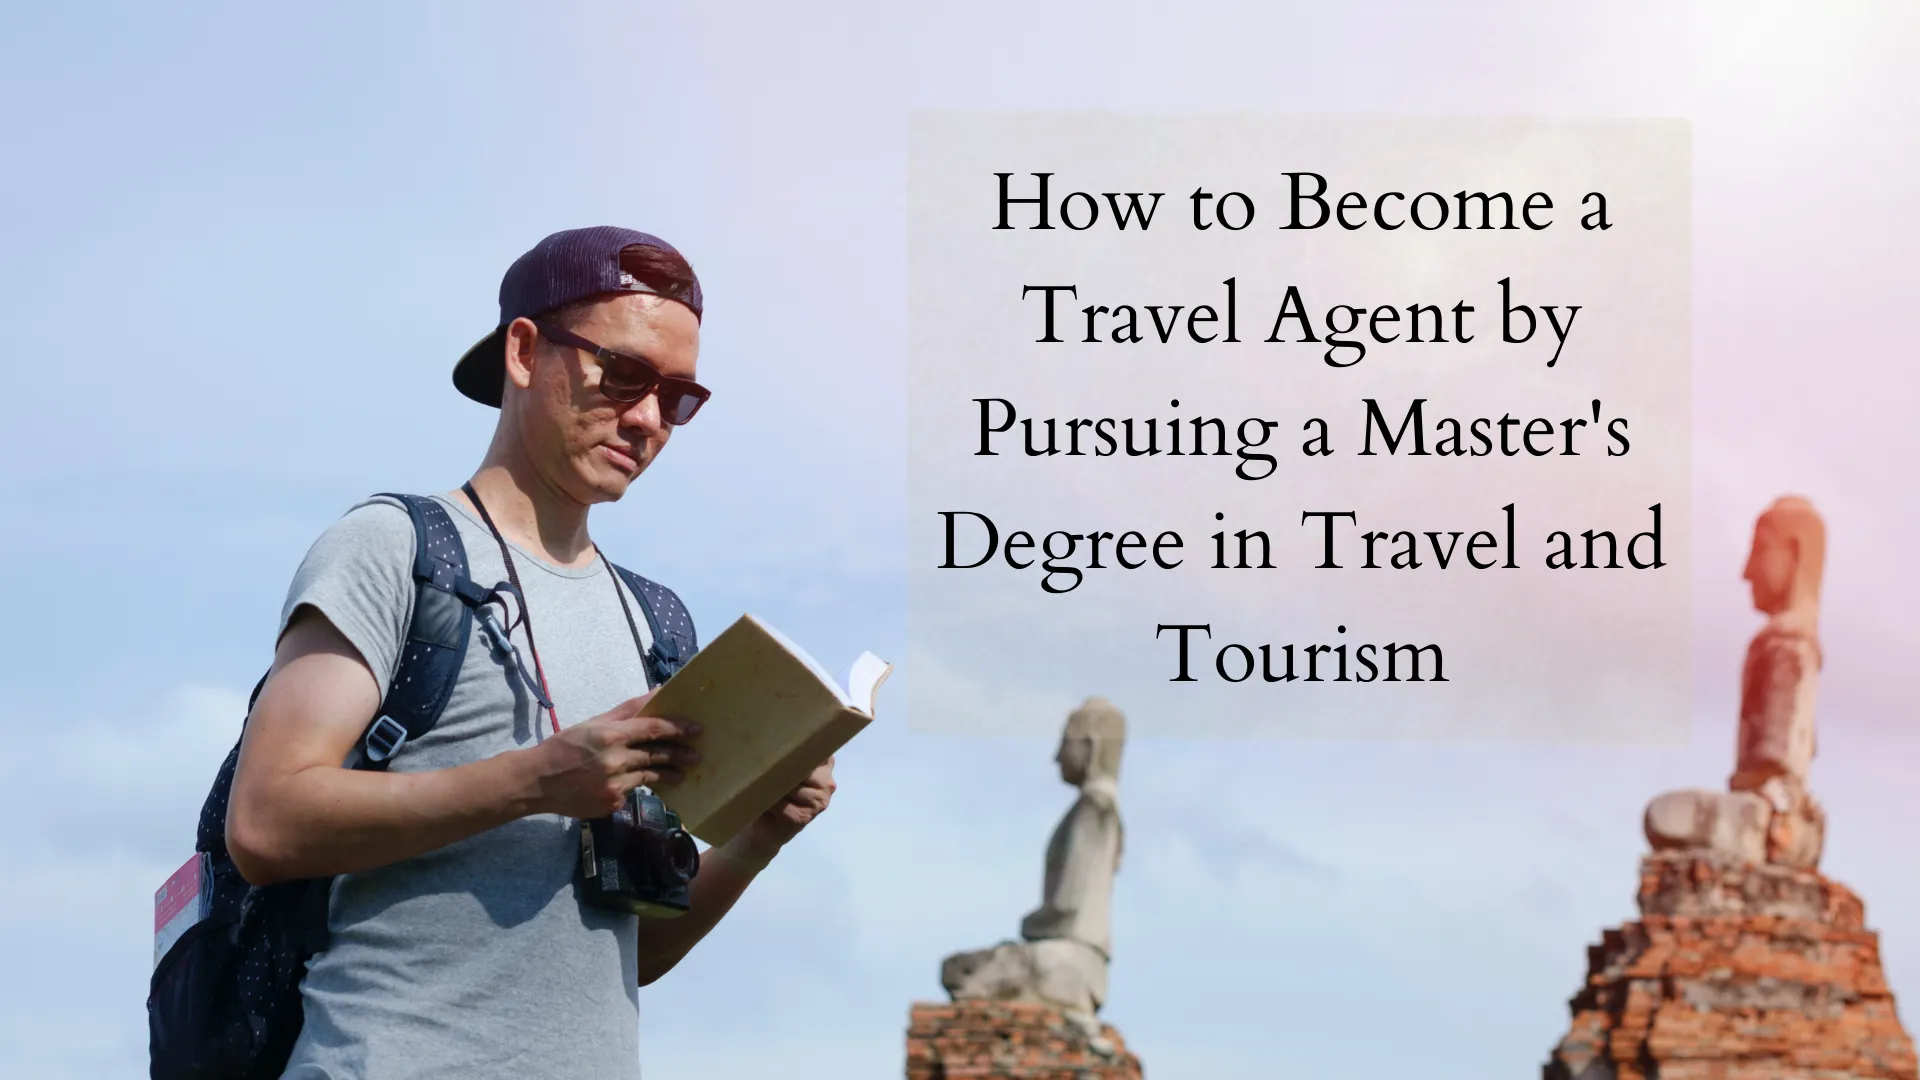 where can i study travel agent